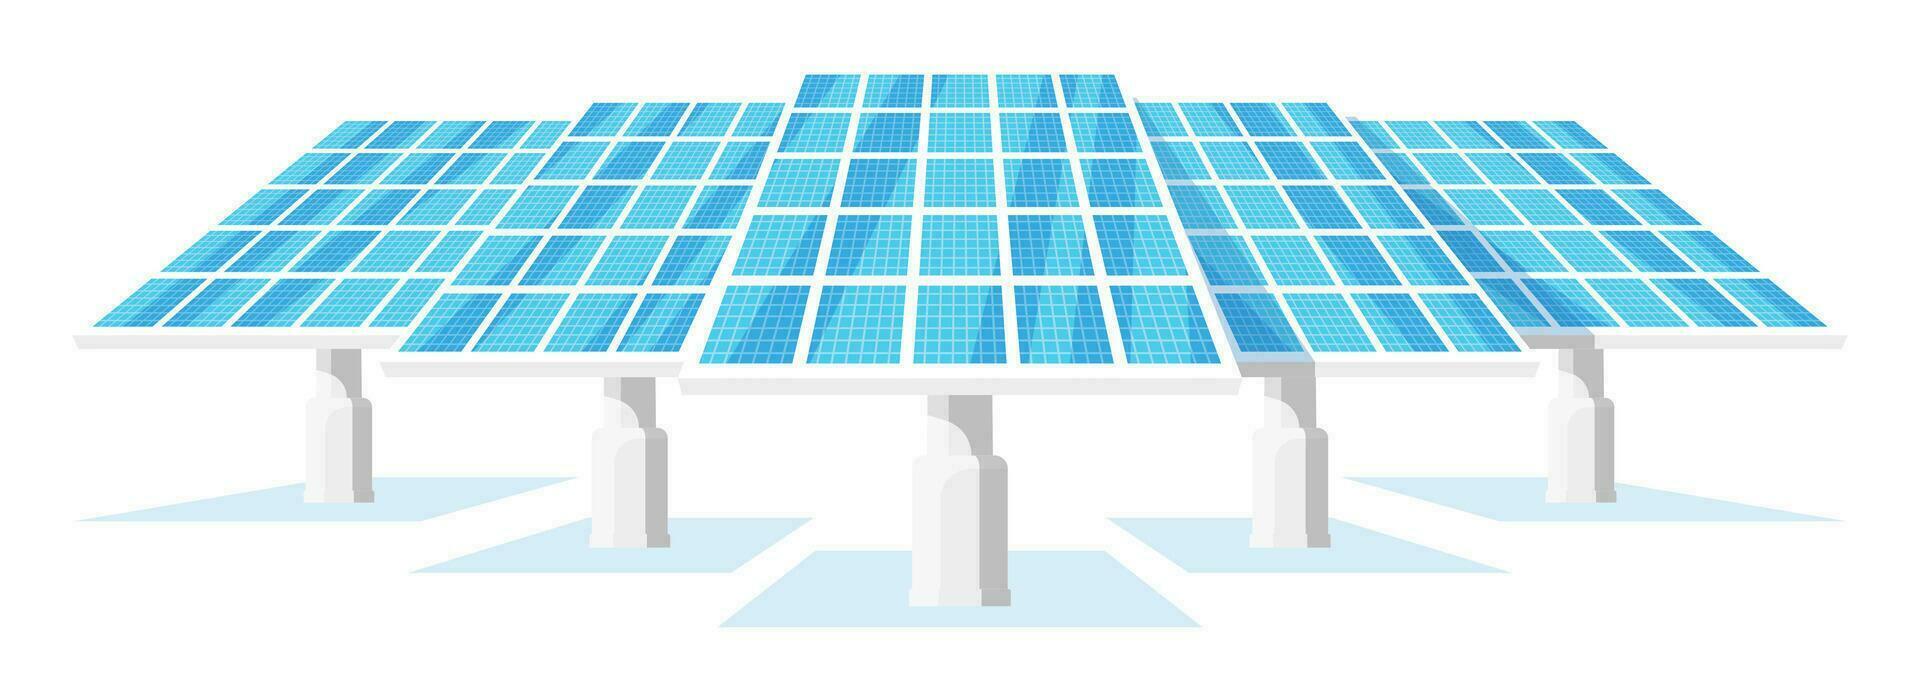 Solar Panels for Alternative Energy Generation. Sun Power Conservation. Blue Energy Resource Isolated on White. Electric System Cell. Alternative Renewable Energy Source. Flat Vector Illustration